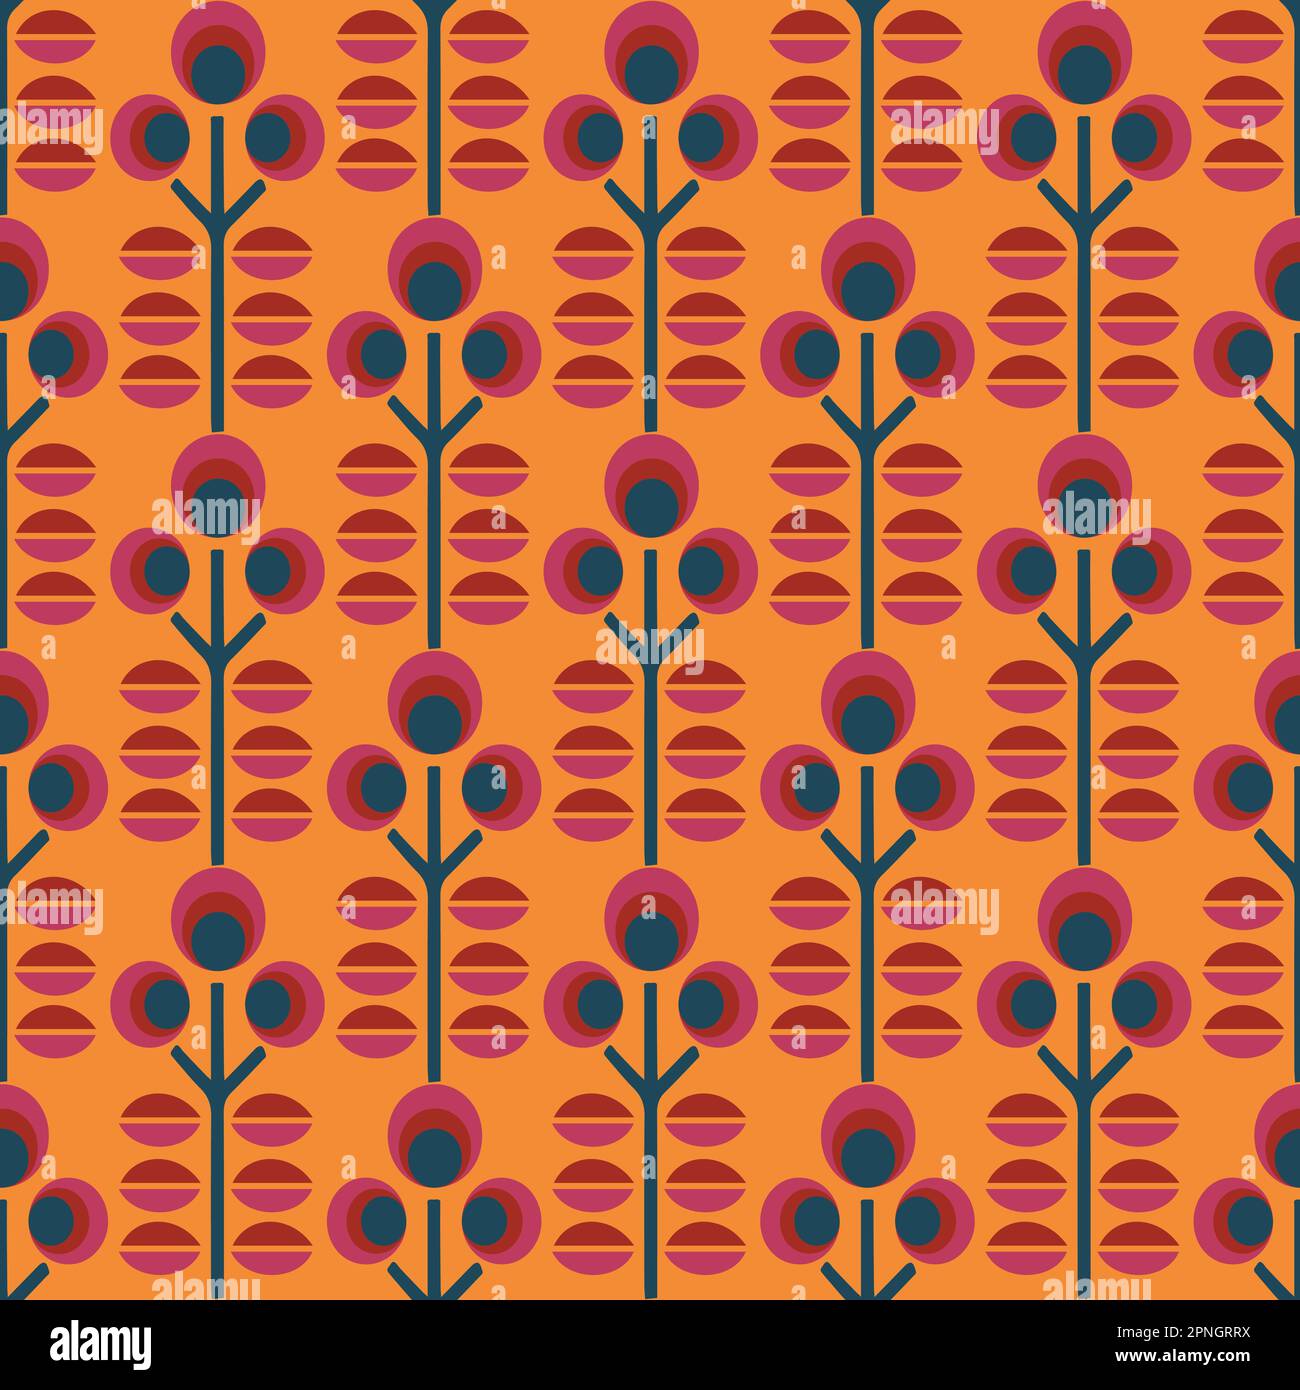 Seamless retro floral pattern in scandinavian style. Modern abstract design for paper, cover, fabric, pacing and other users.  Stock Vector